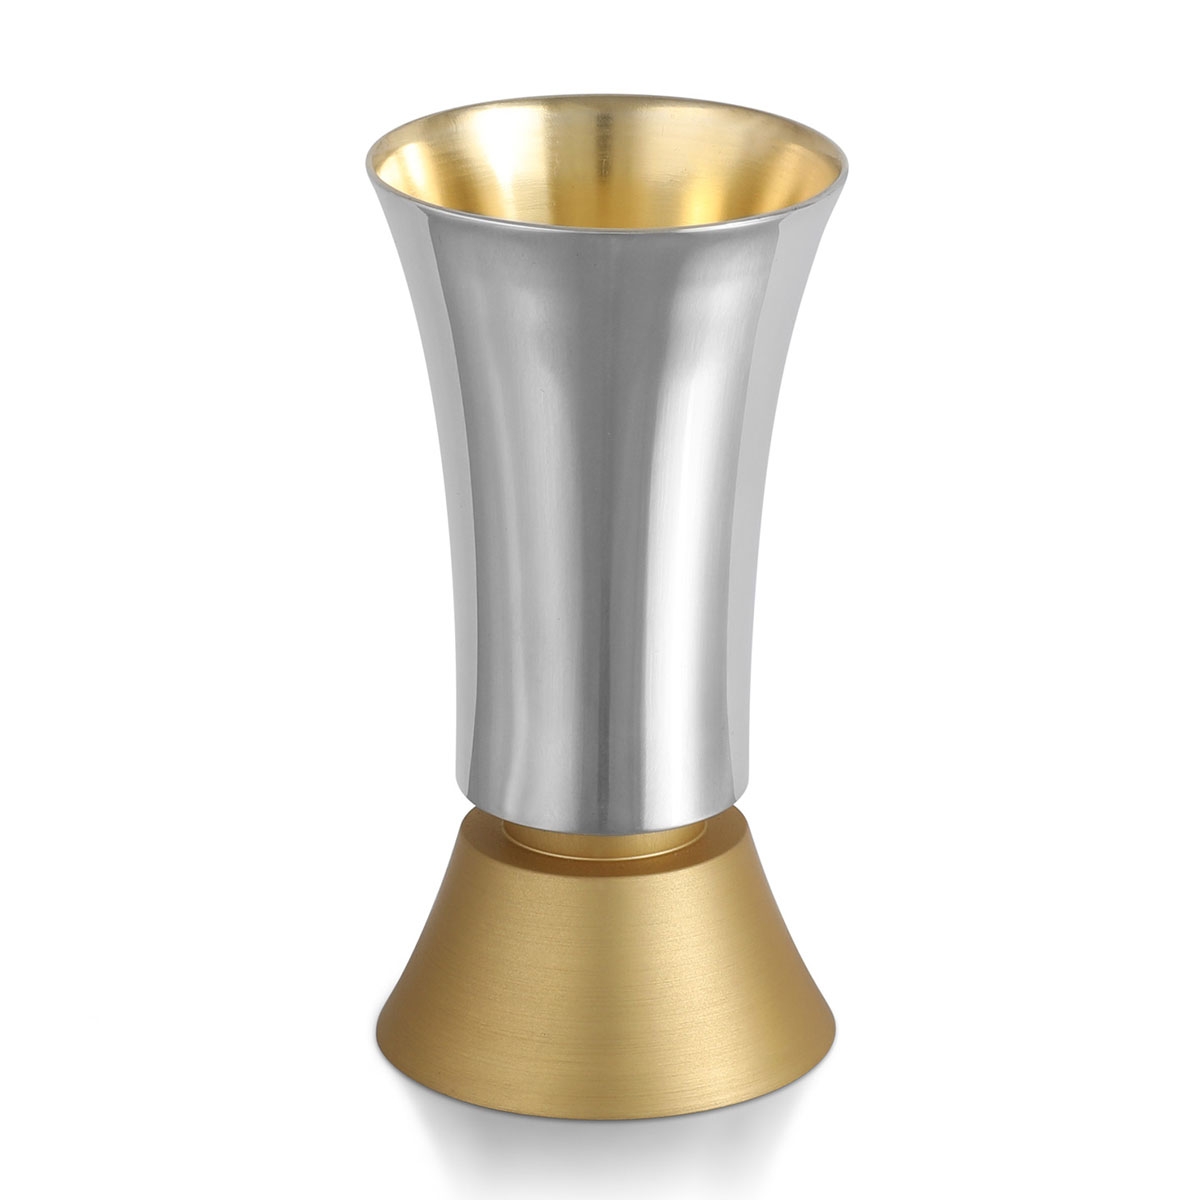 Bier Judaica 925 Sterling Silver Kiddush Cup With Golden Anodized Aluminum Base - 1